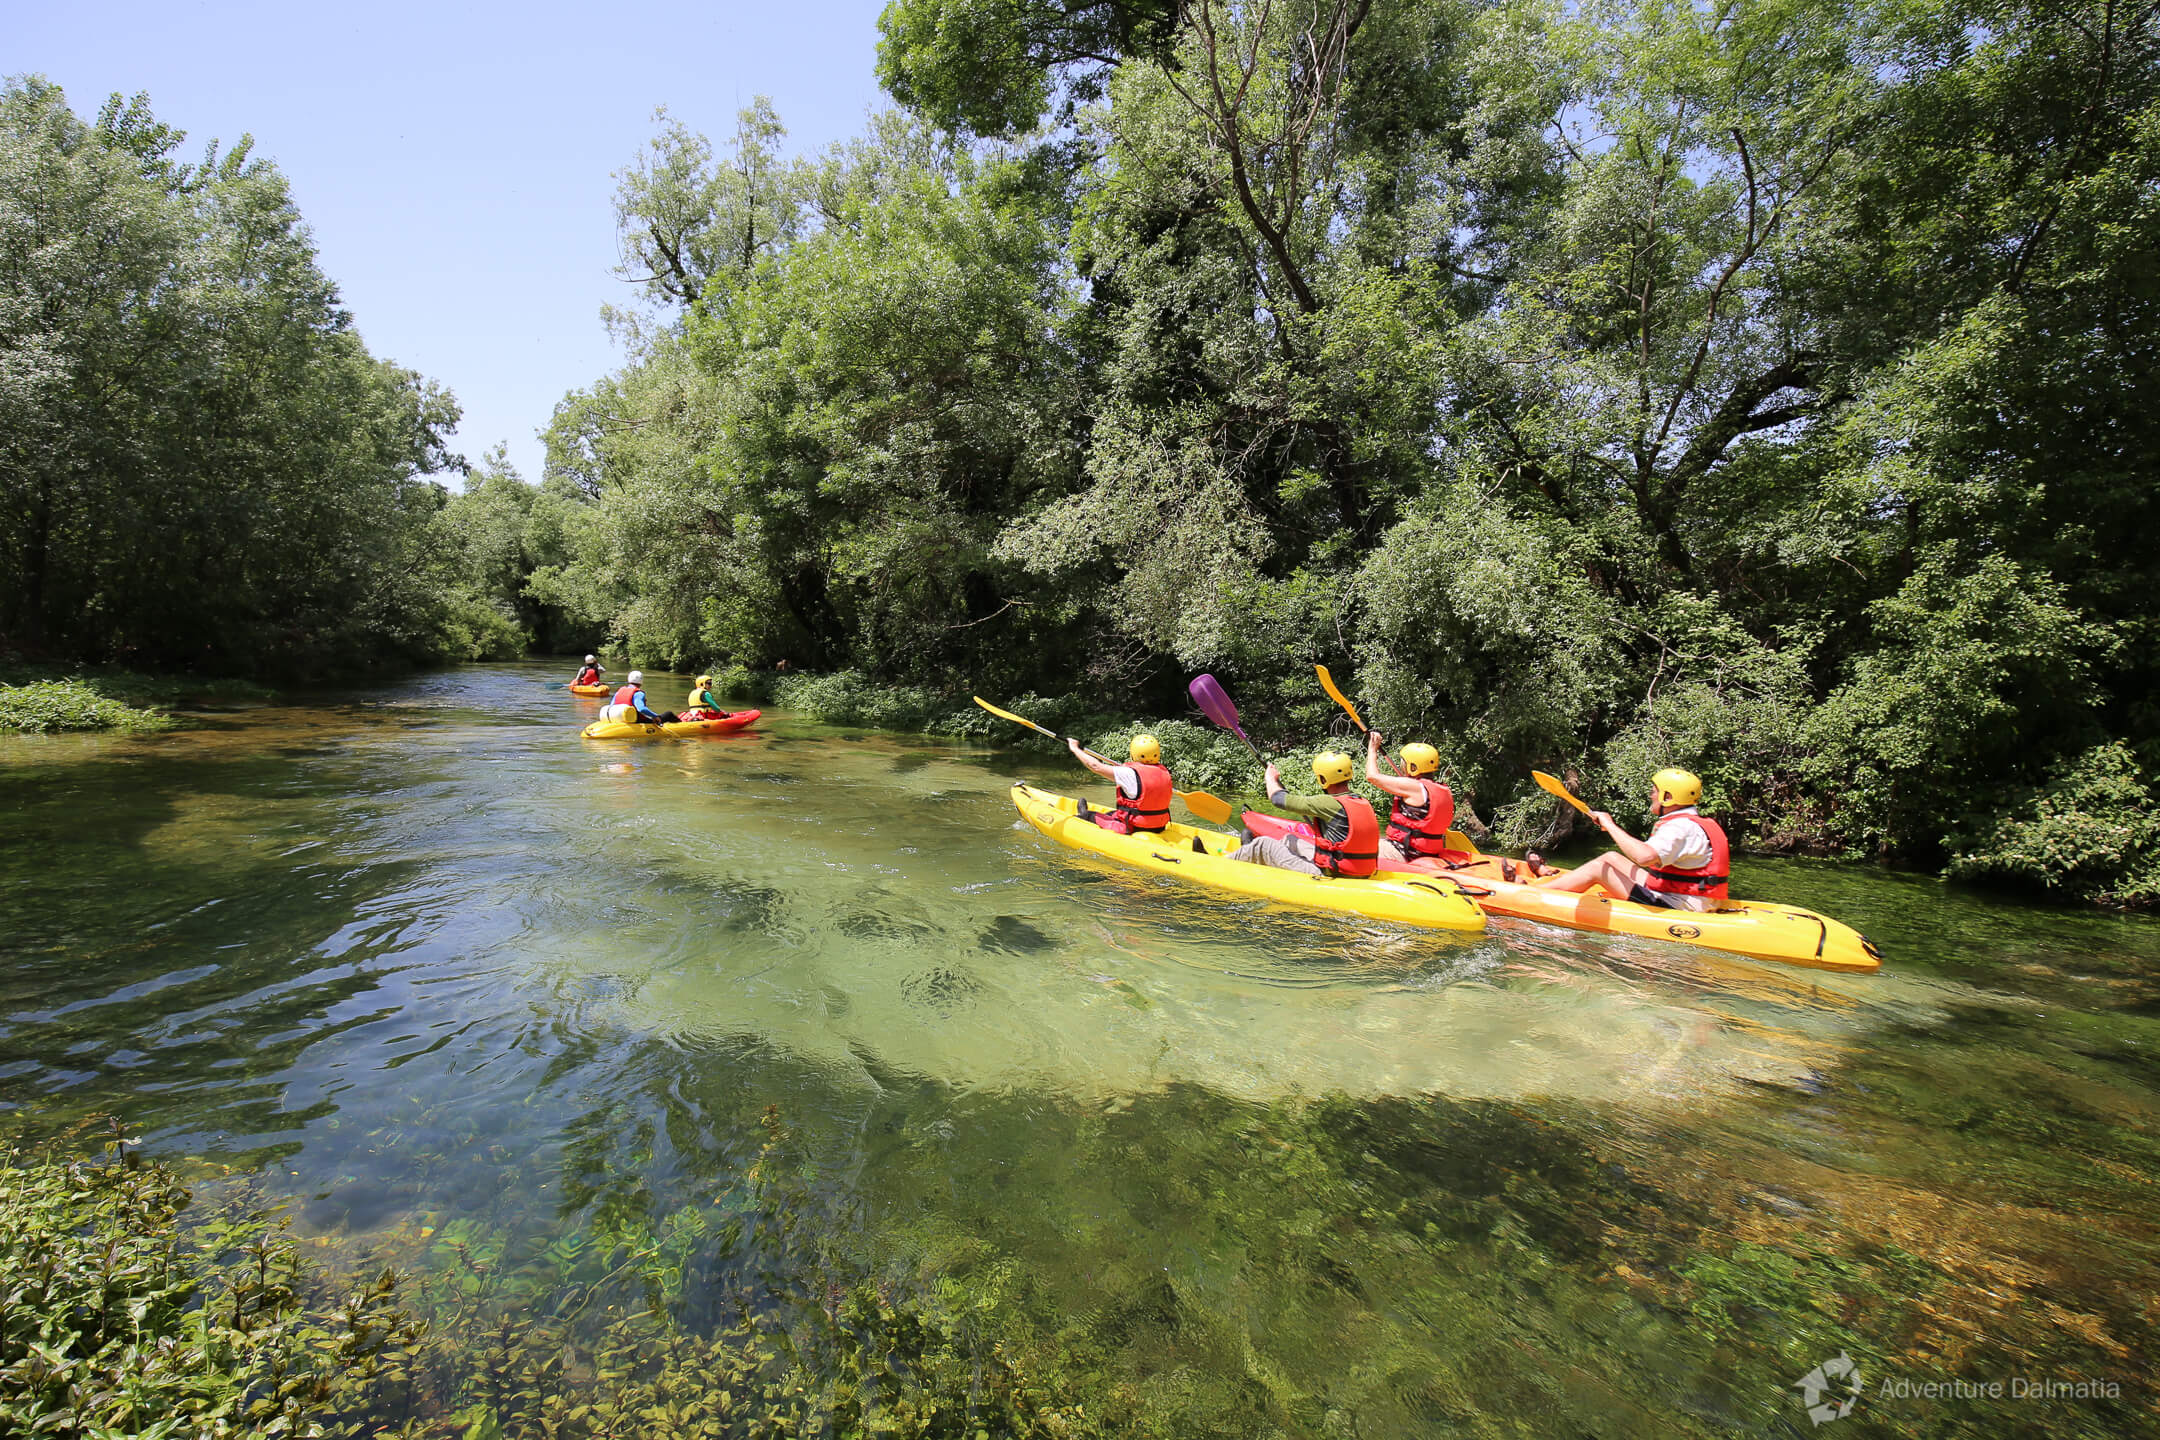 Canoeing on Vrljika river; excursion for whole family